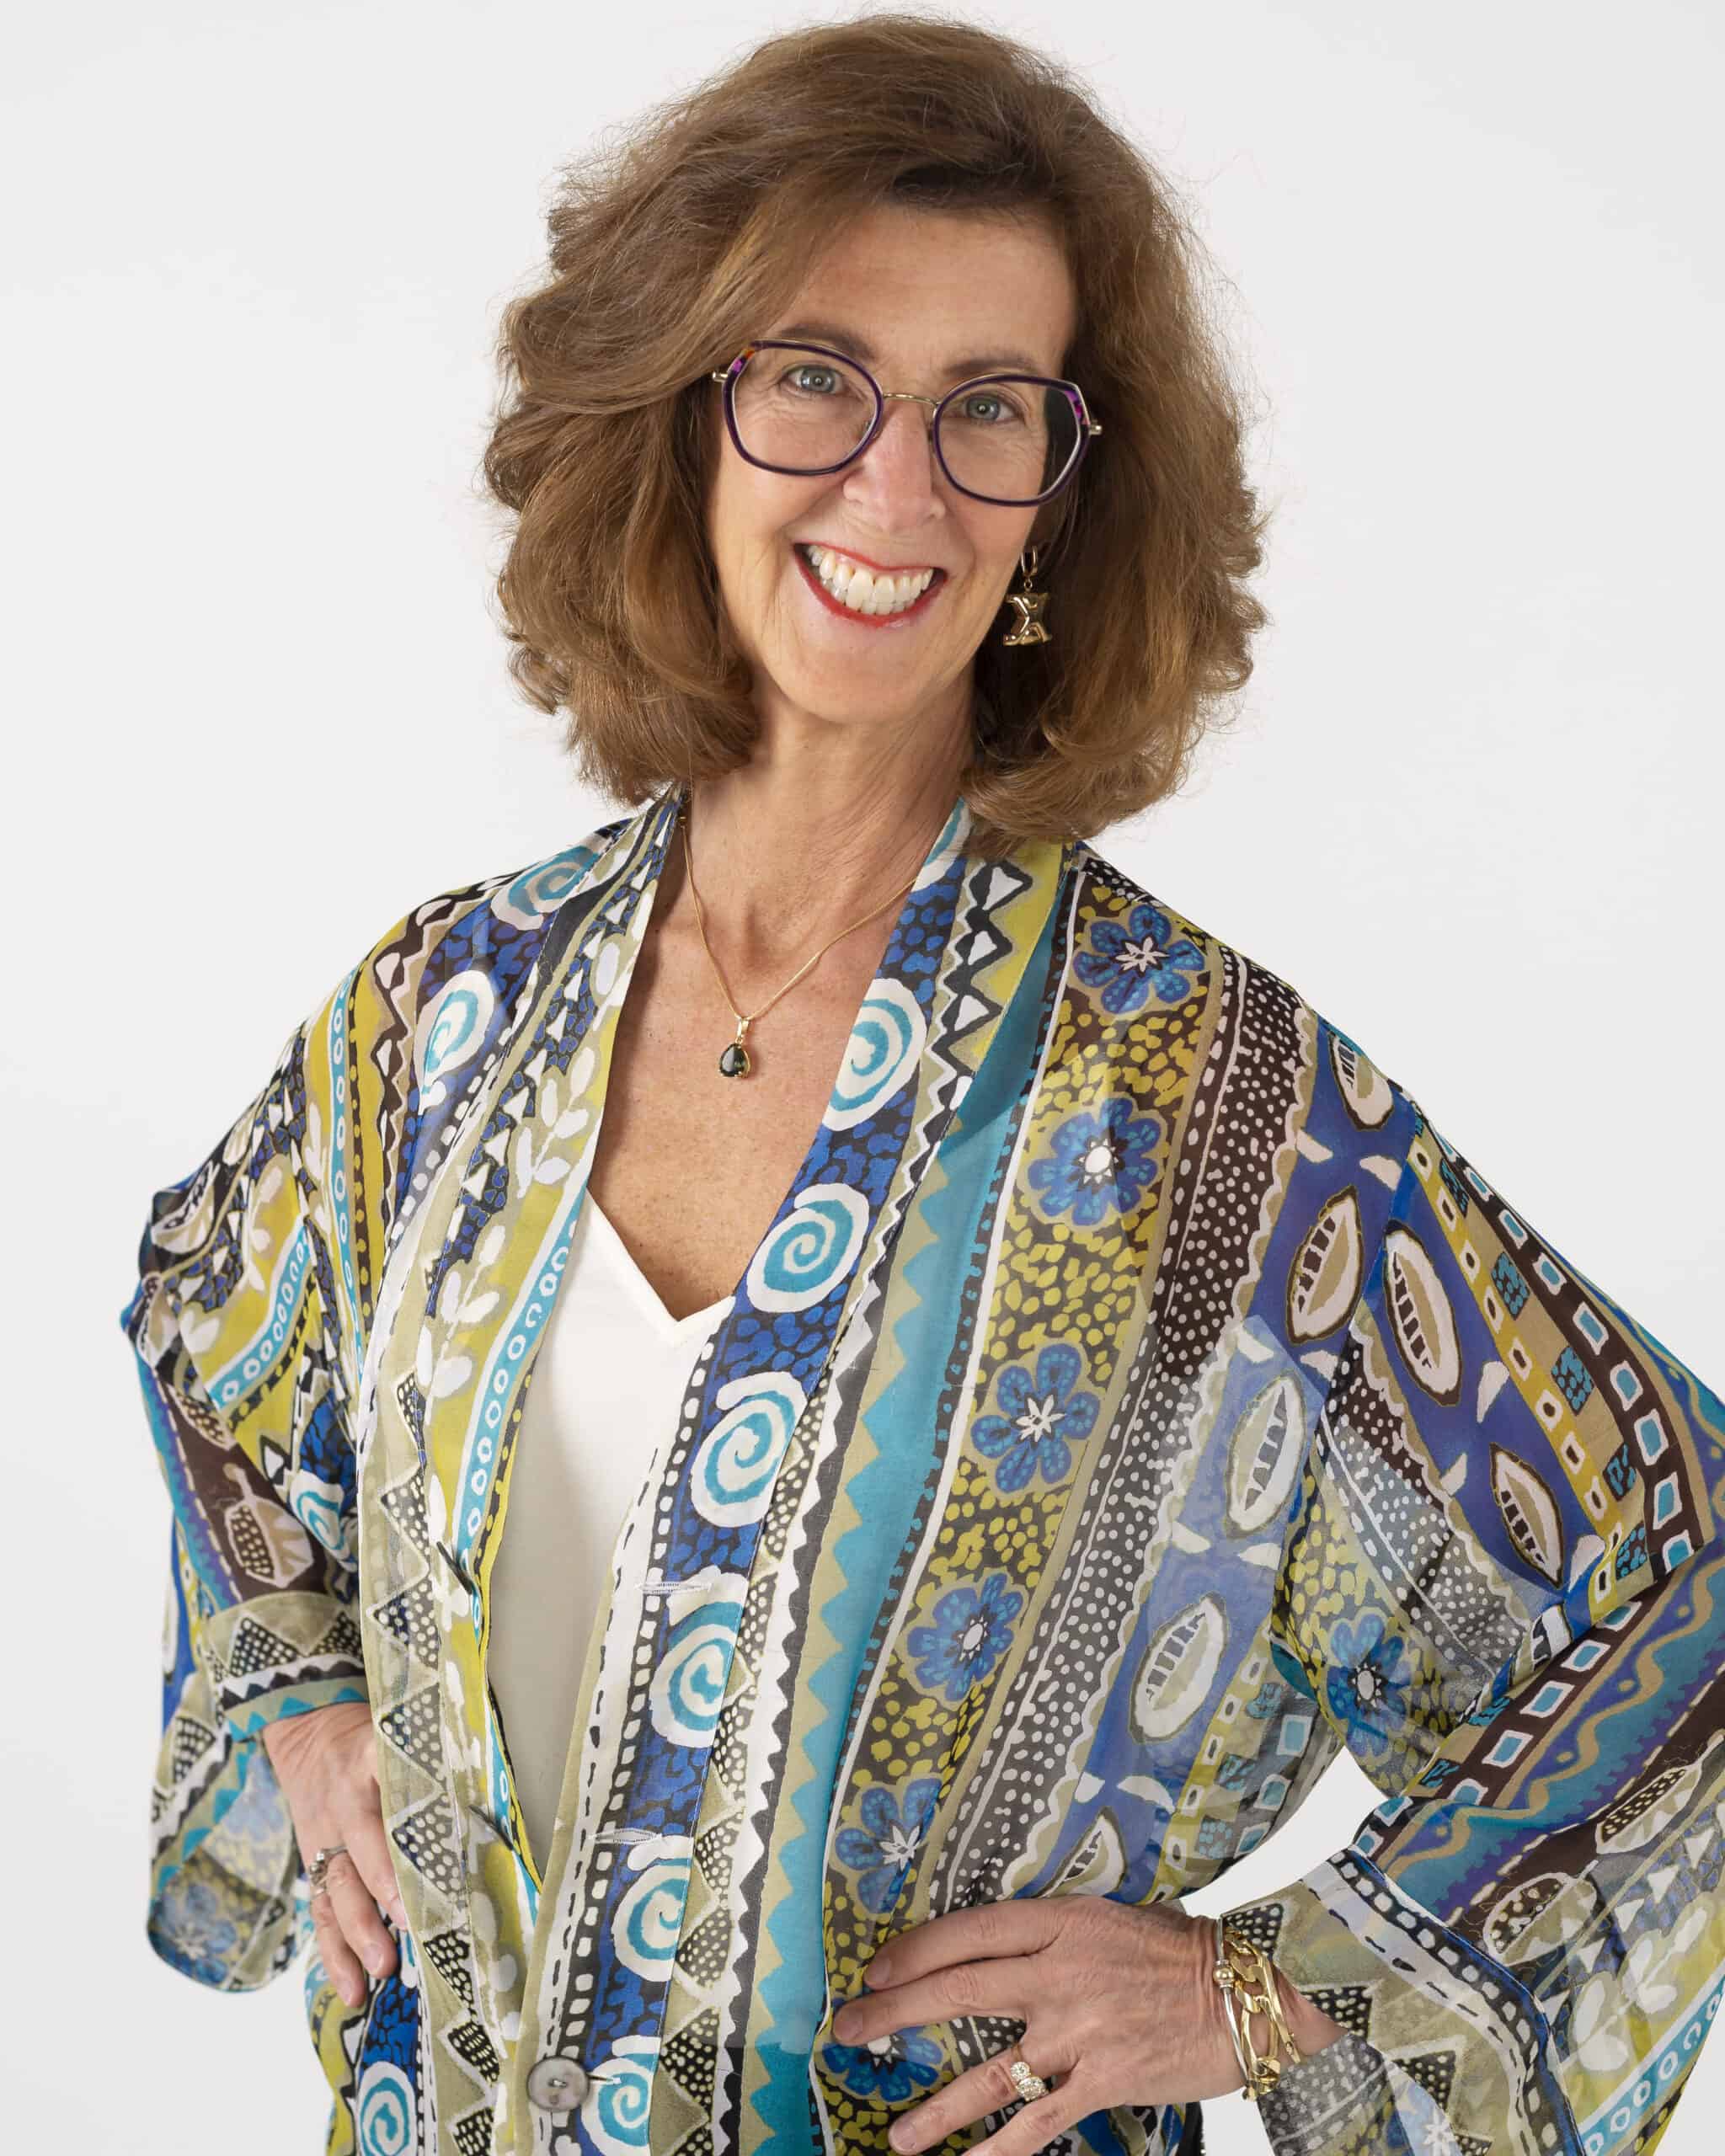 Image of Nancy Clairmont Carr in a white v-neck blouse and colorful cardigan